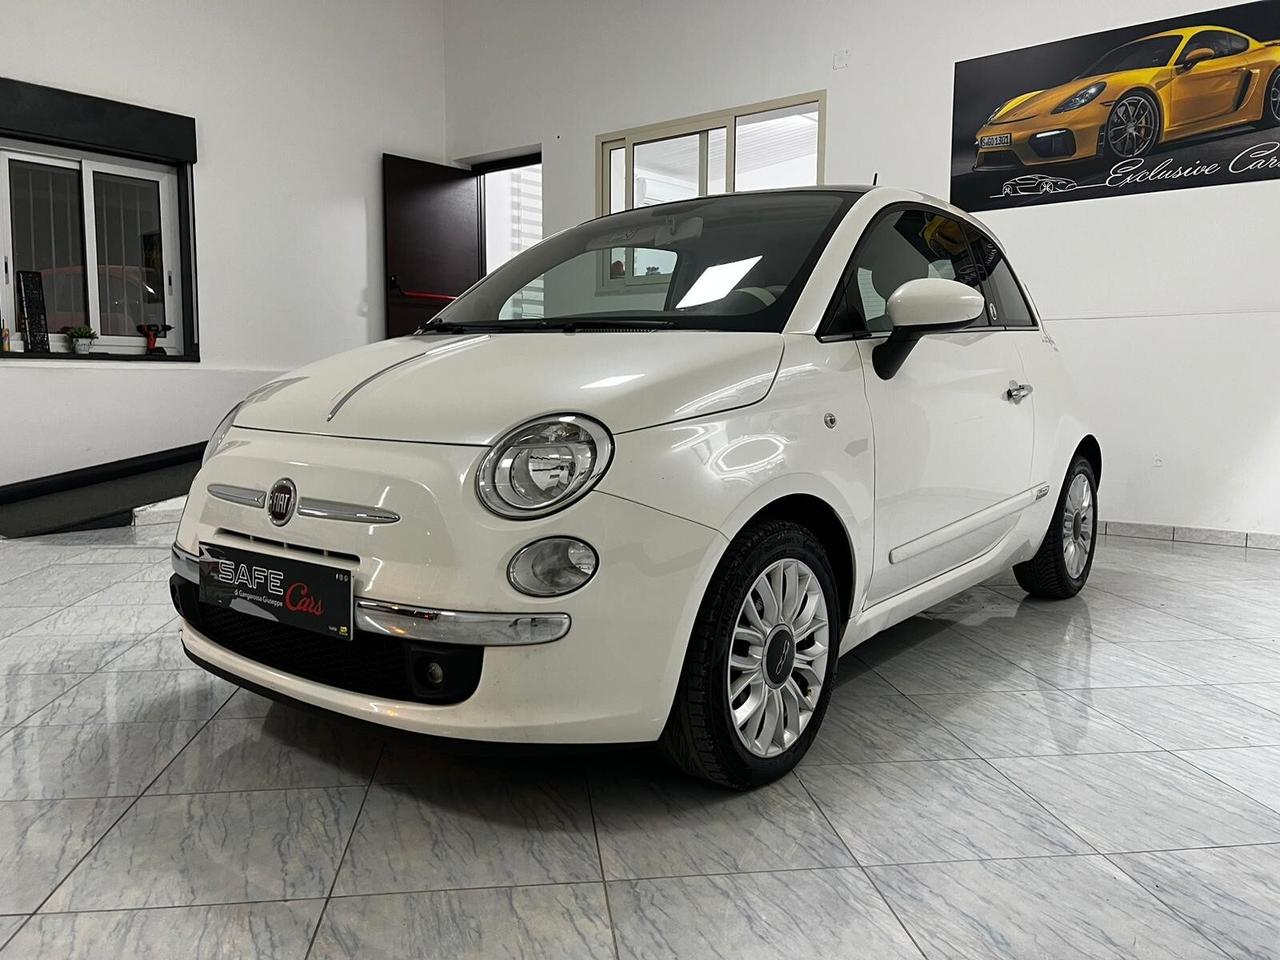 Fiat 500 1.2 Lounge limited edition BY GUERLAN